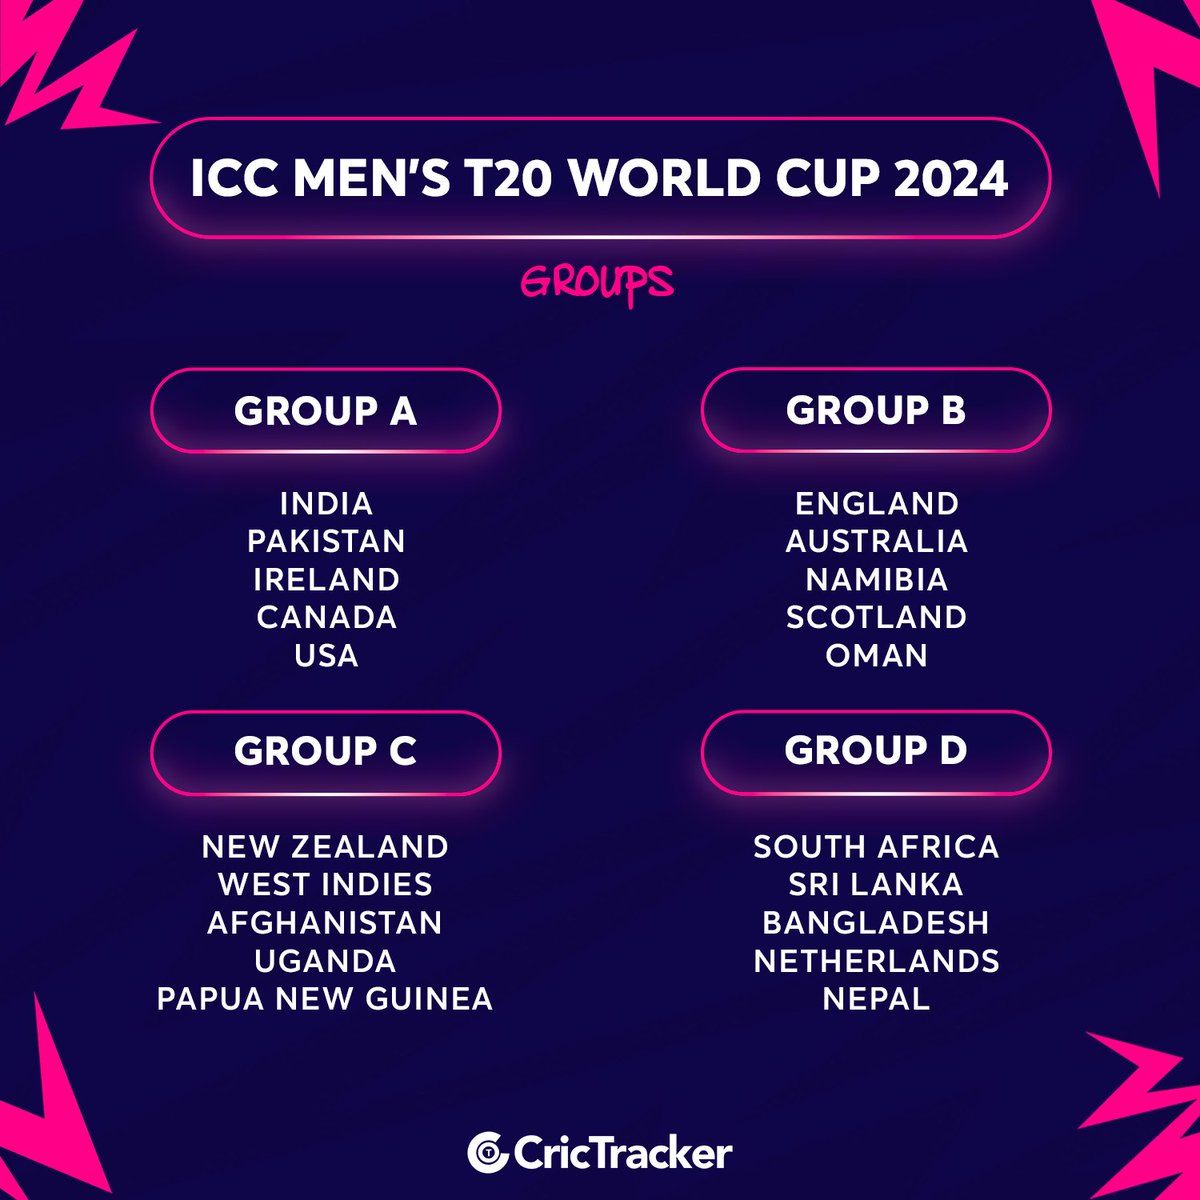 The groups for the T20 World Cup 2024 are set.

The top two teams from each group will advance to the Super 8 stage 🏆